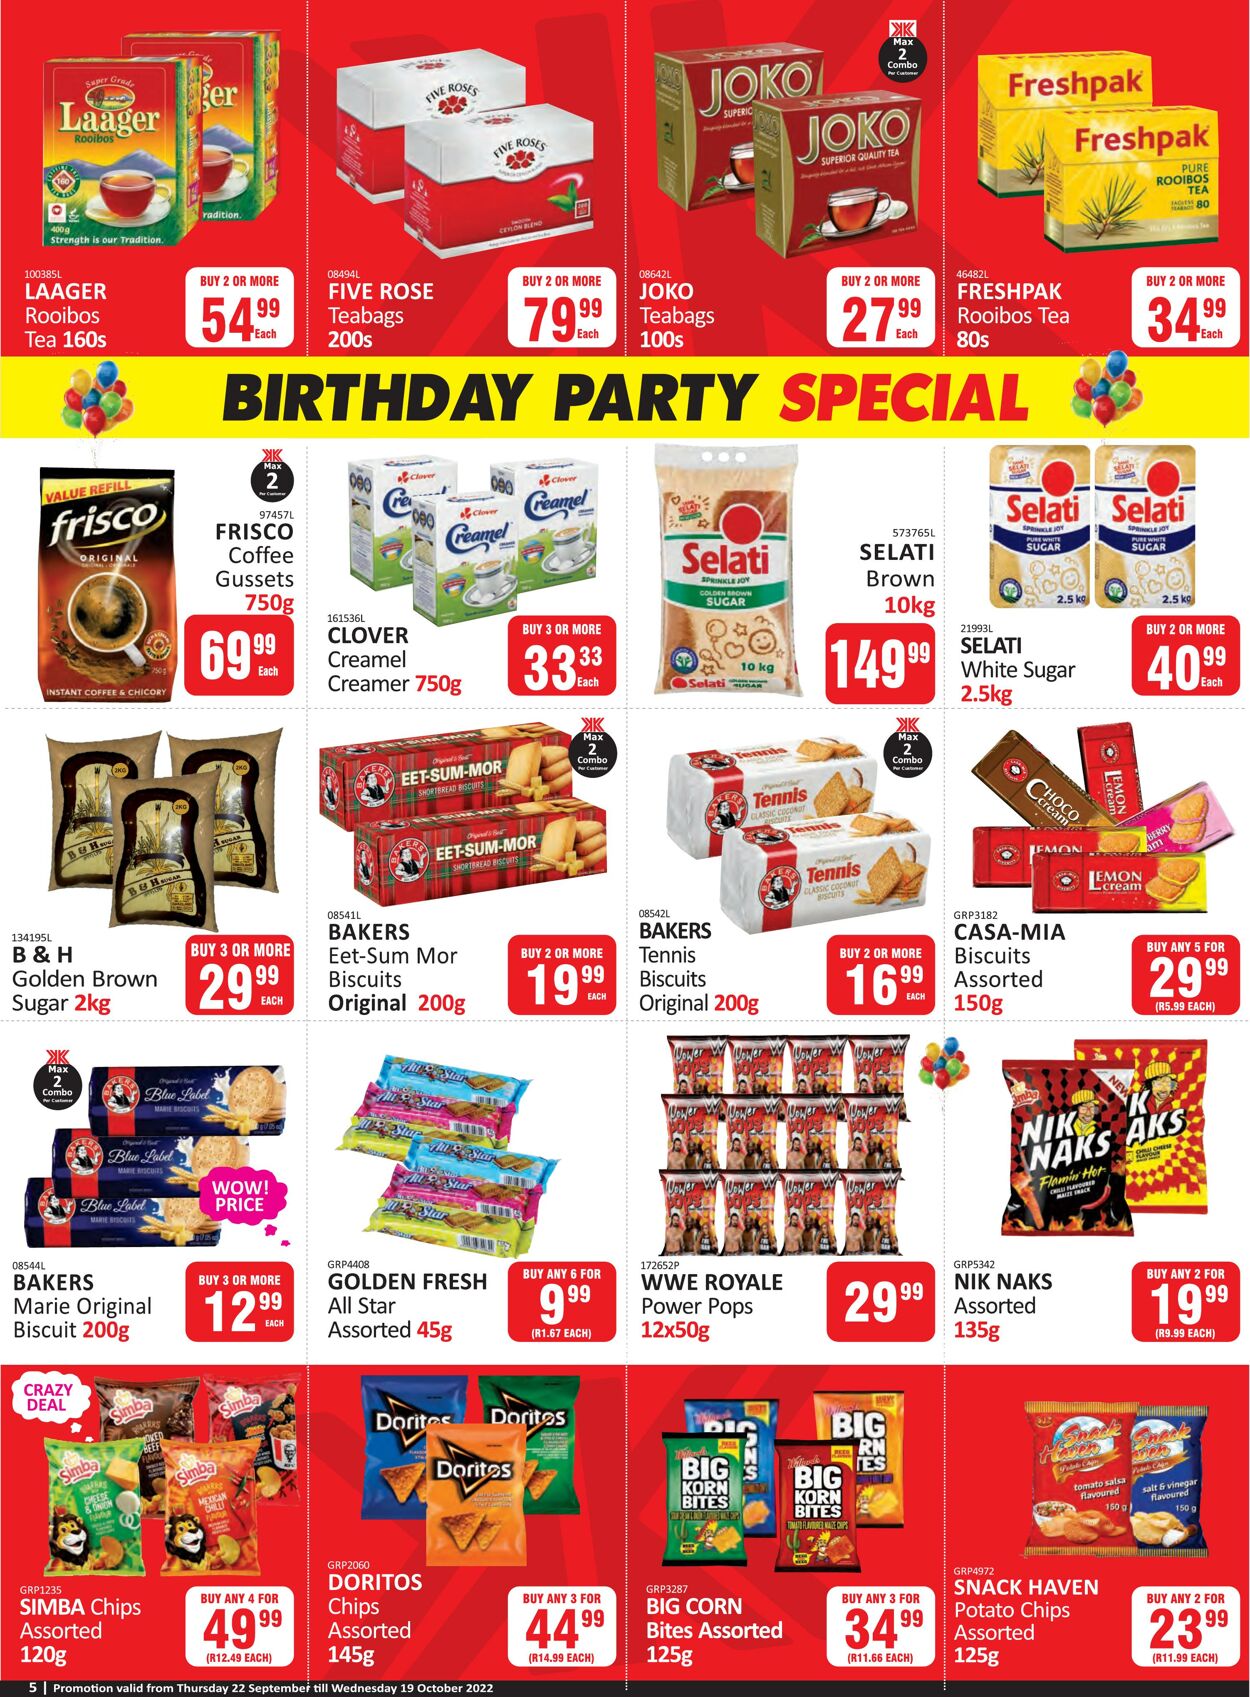 Special Kit Kat Cash and Carry 22.09.2022 - 19.10.2022